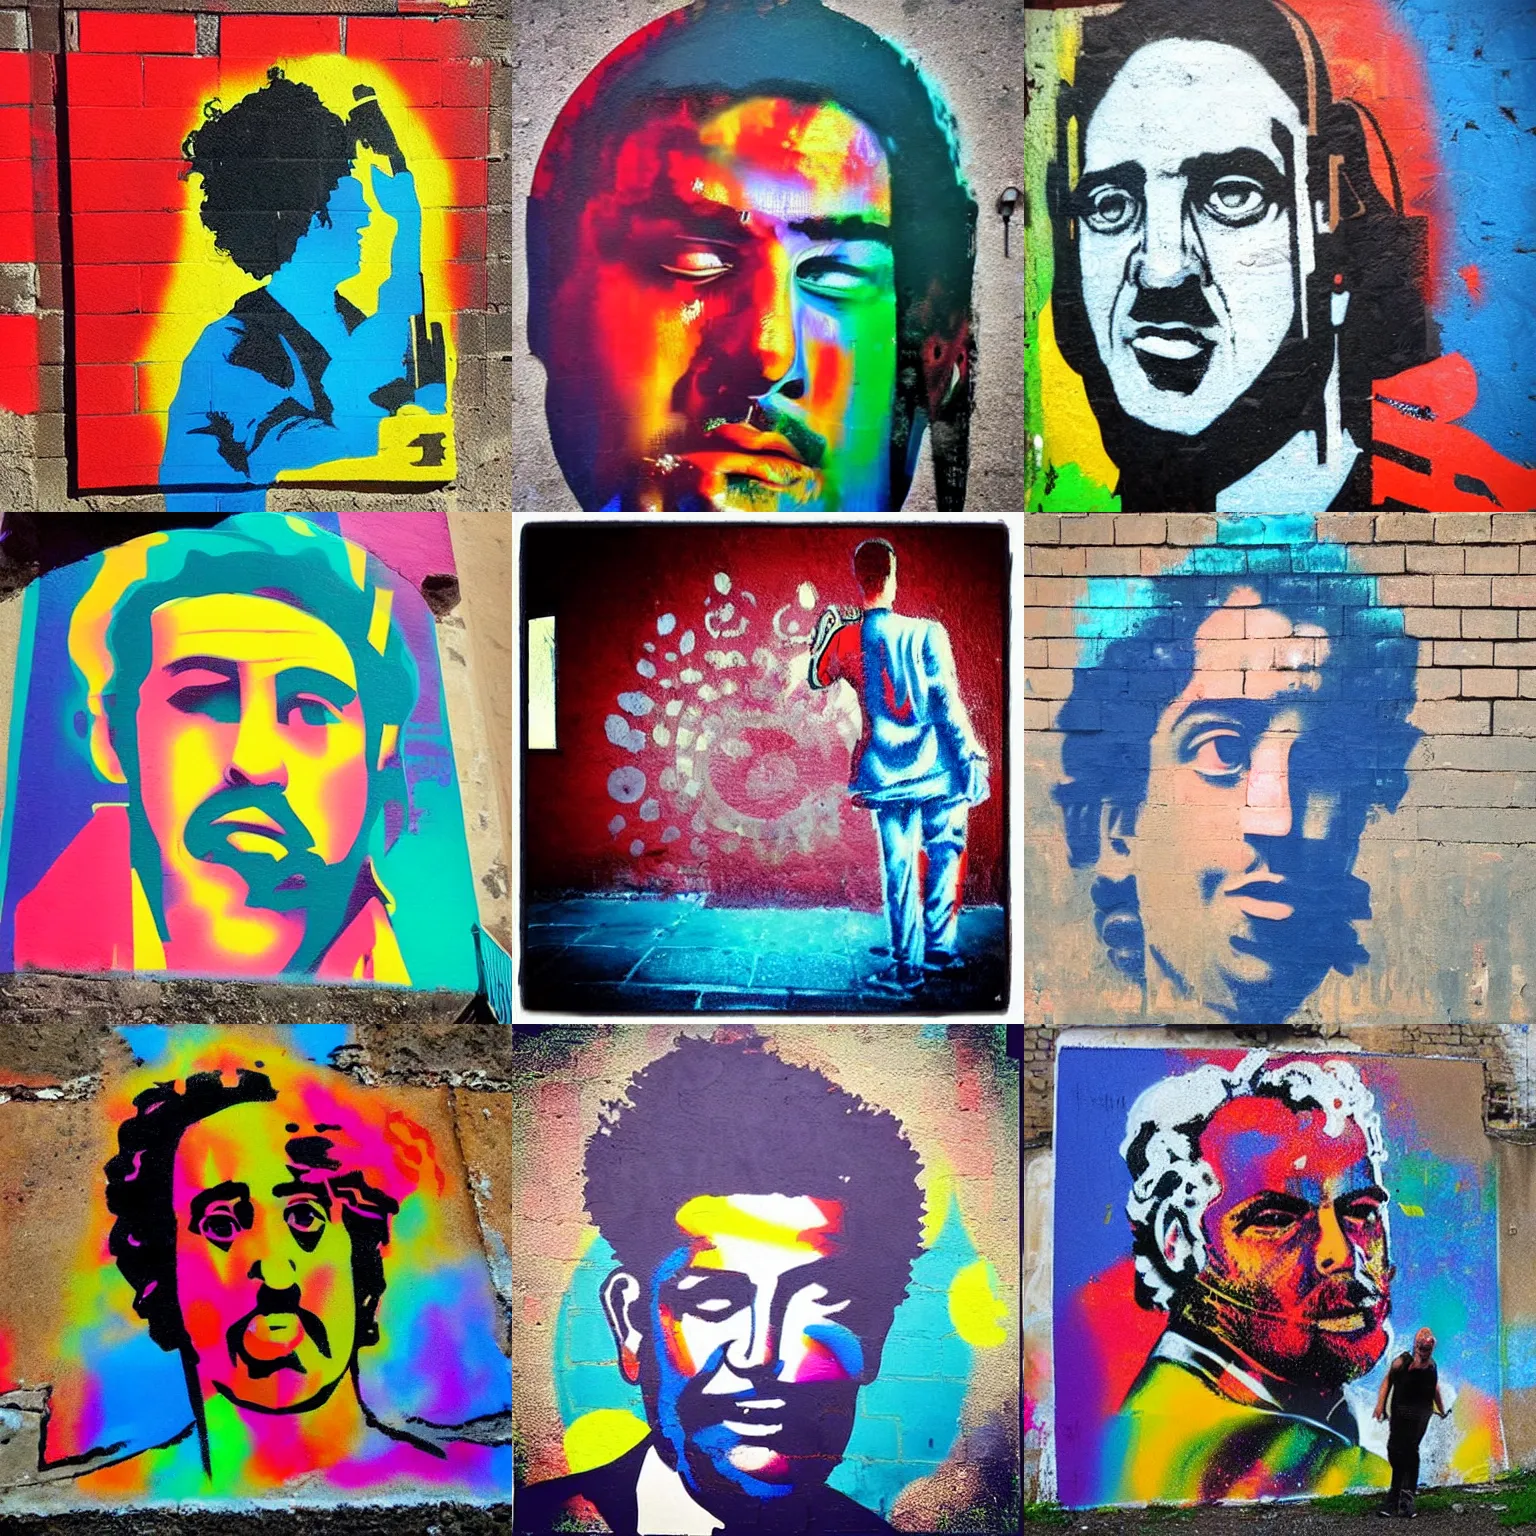 Prompt: “Spray paint stencil portrait of a Greek musician on the city wall, colorful, but very good looking”